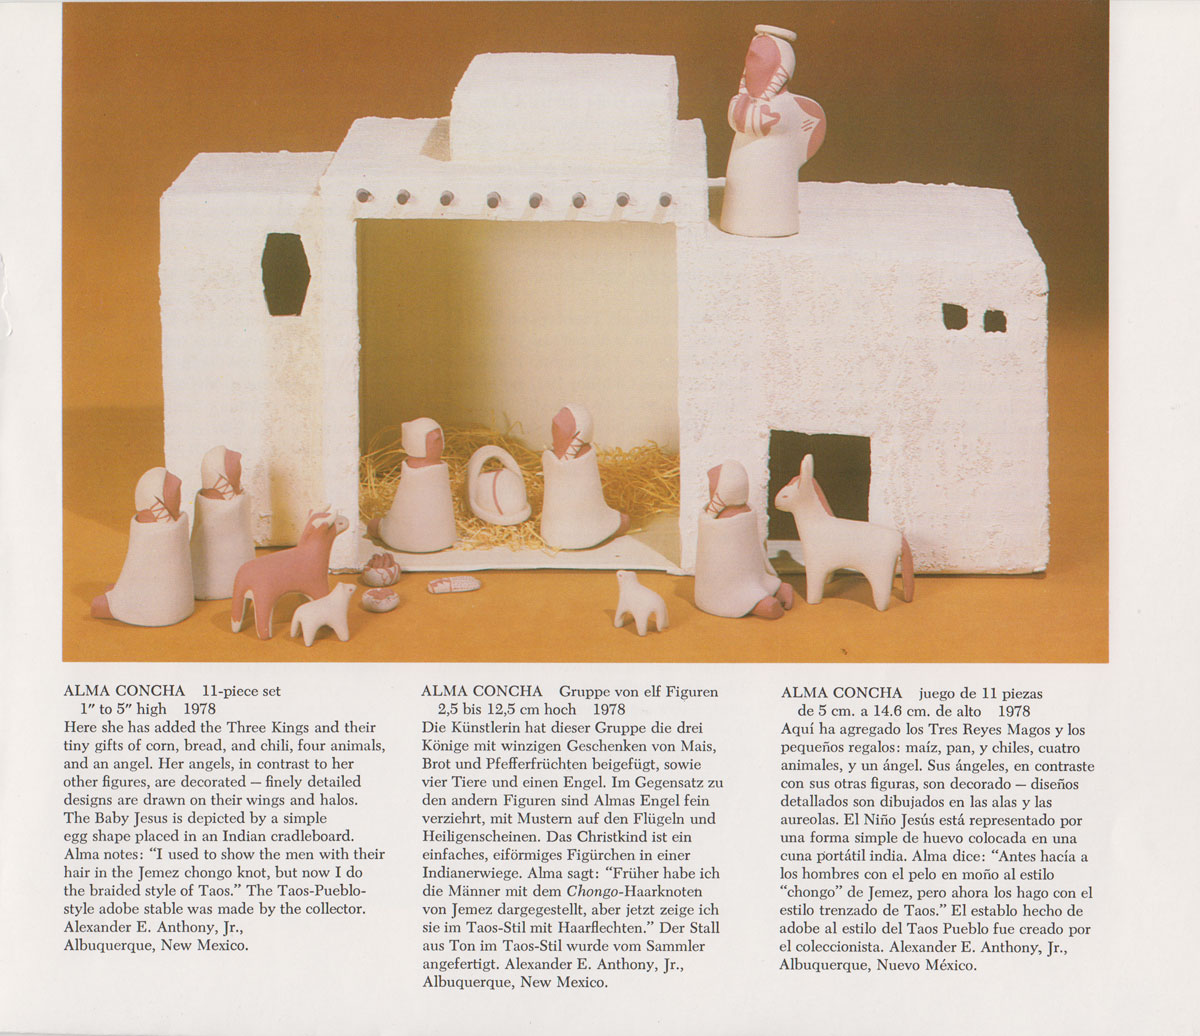 This nacimiento is included in the first edition of the book Nacimientos: Nativity Scenes by Southwest Indian Artisans by Guy and Doris Monthan, on page 79.  Included with the set is a handmade stable constructed from cardboard boxes, painted, with vigas, and stucco, made by the collector of the set.  The stable will be included with the nacimiento.